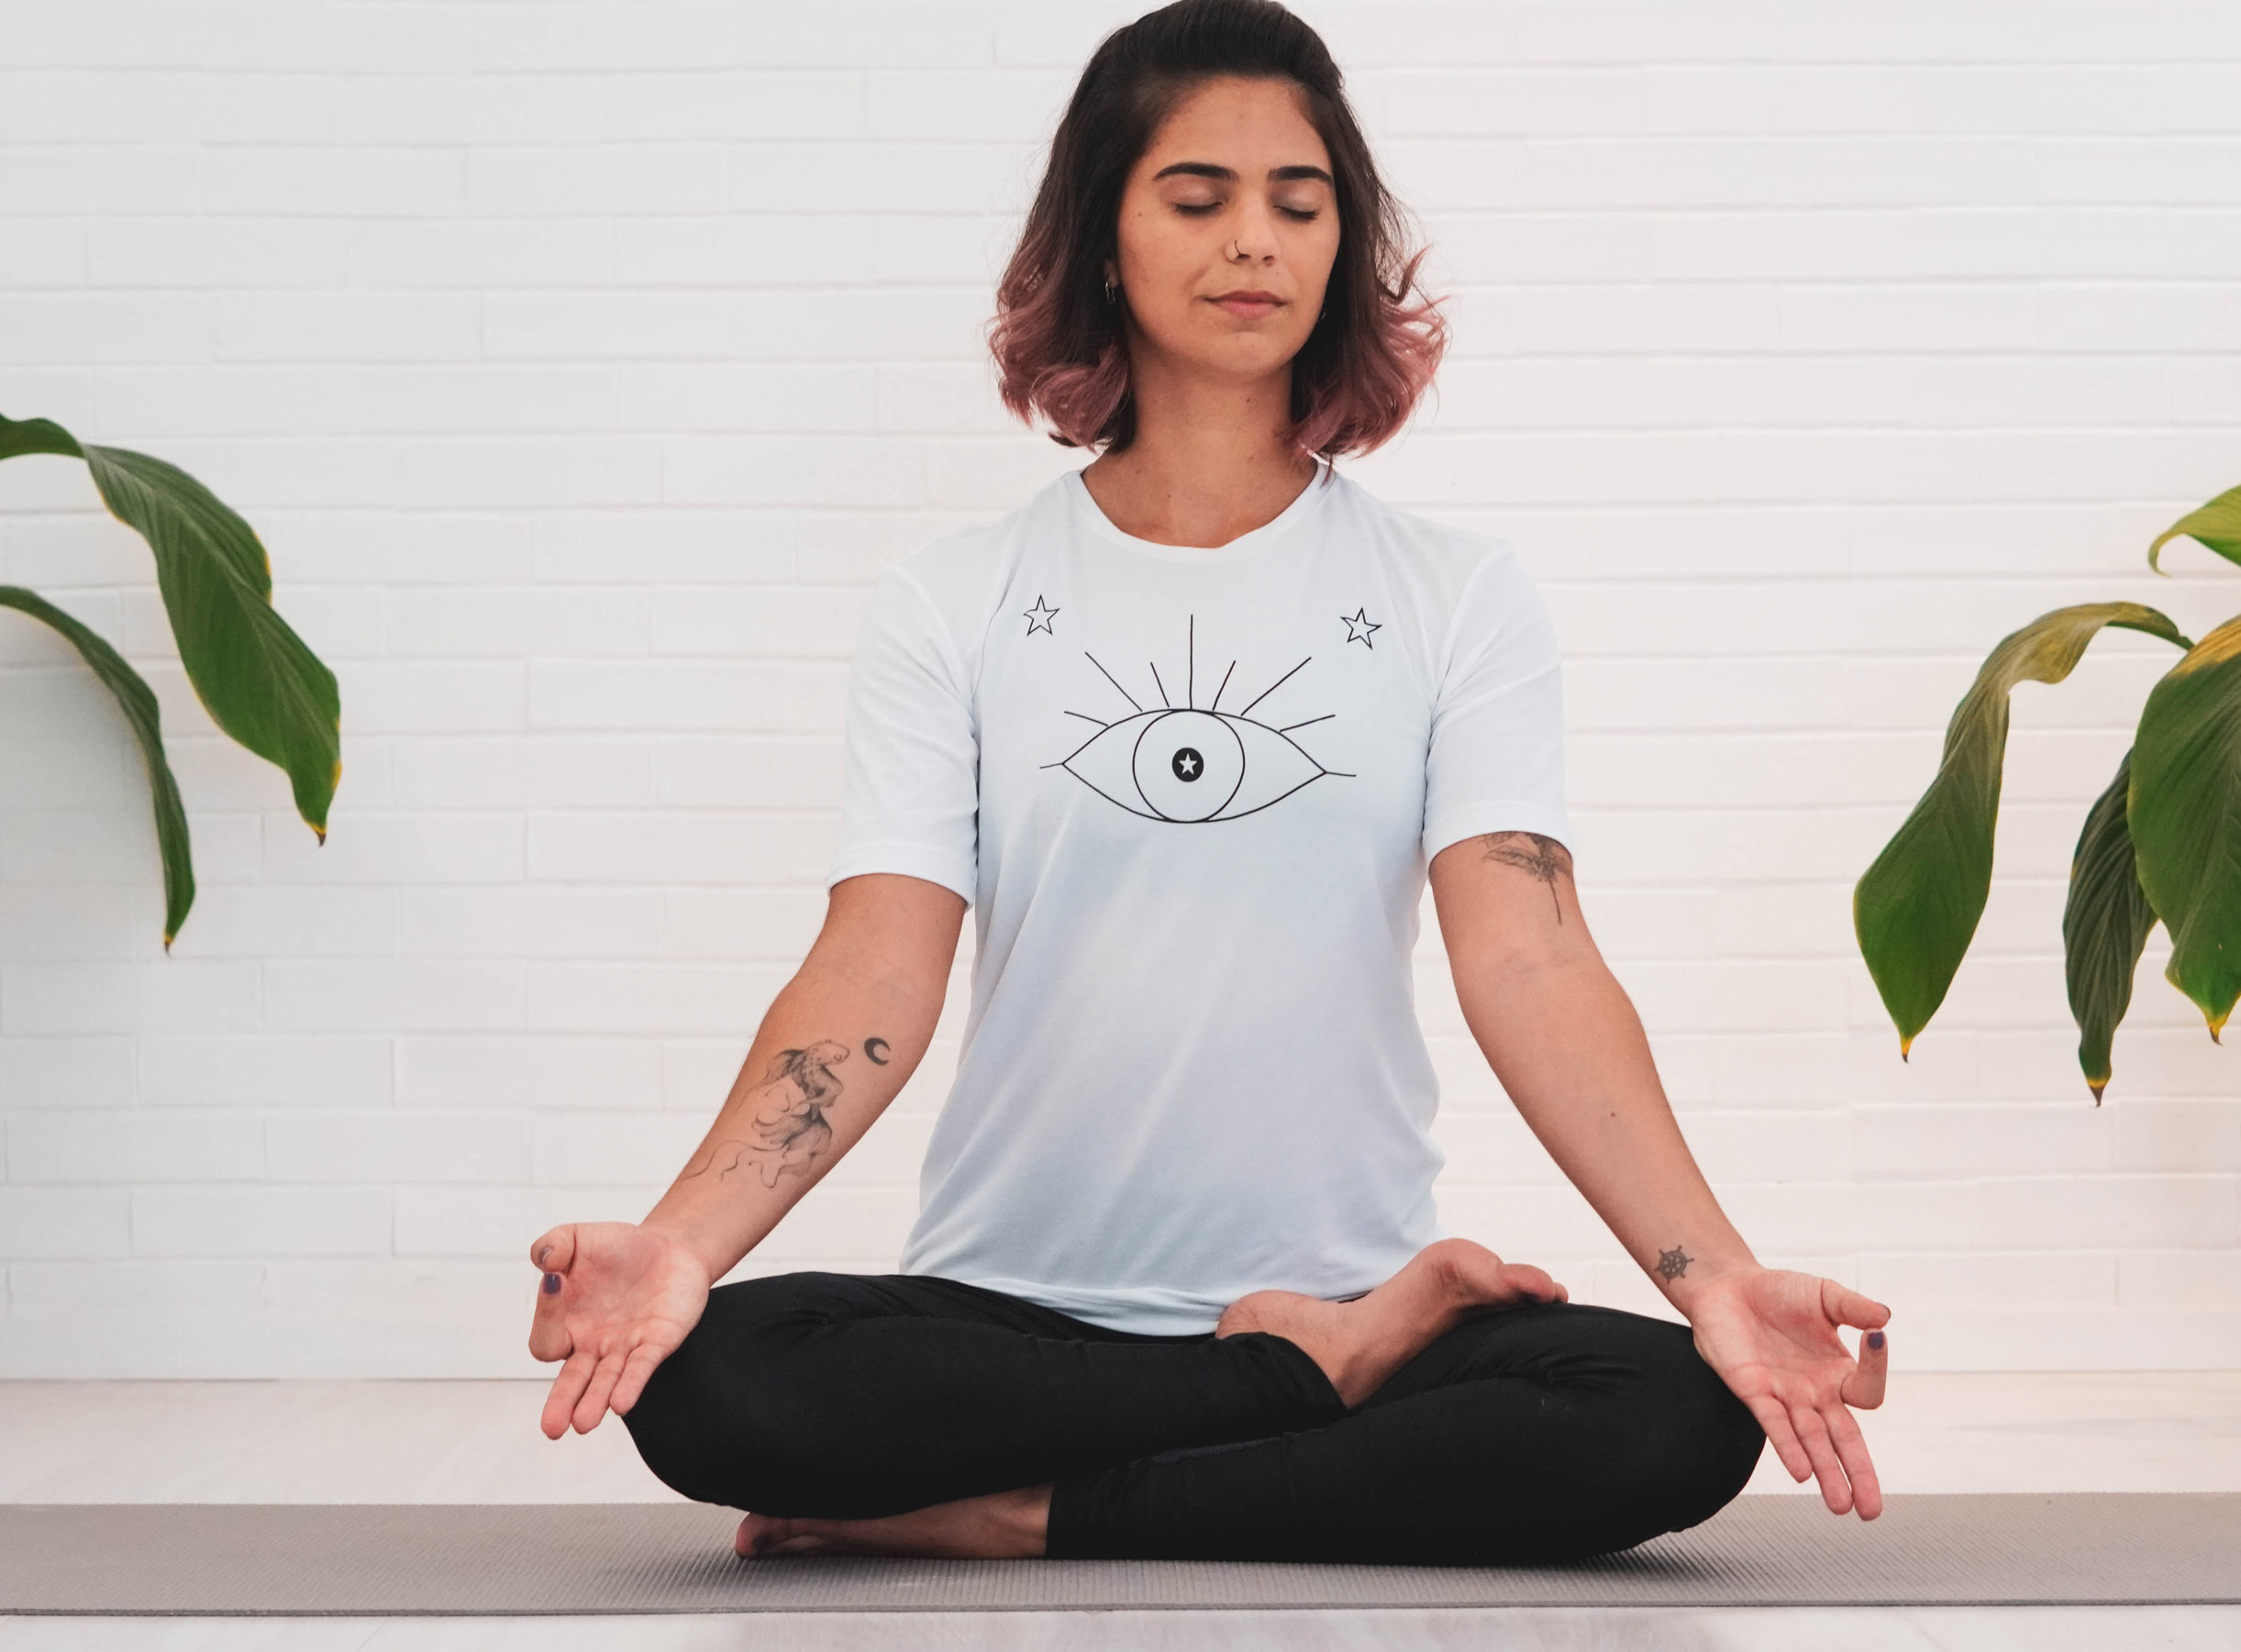 Harnessing Daily Health Tracking for Enhanced Mental Well-Being: The Mindfulness Connection